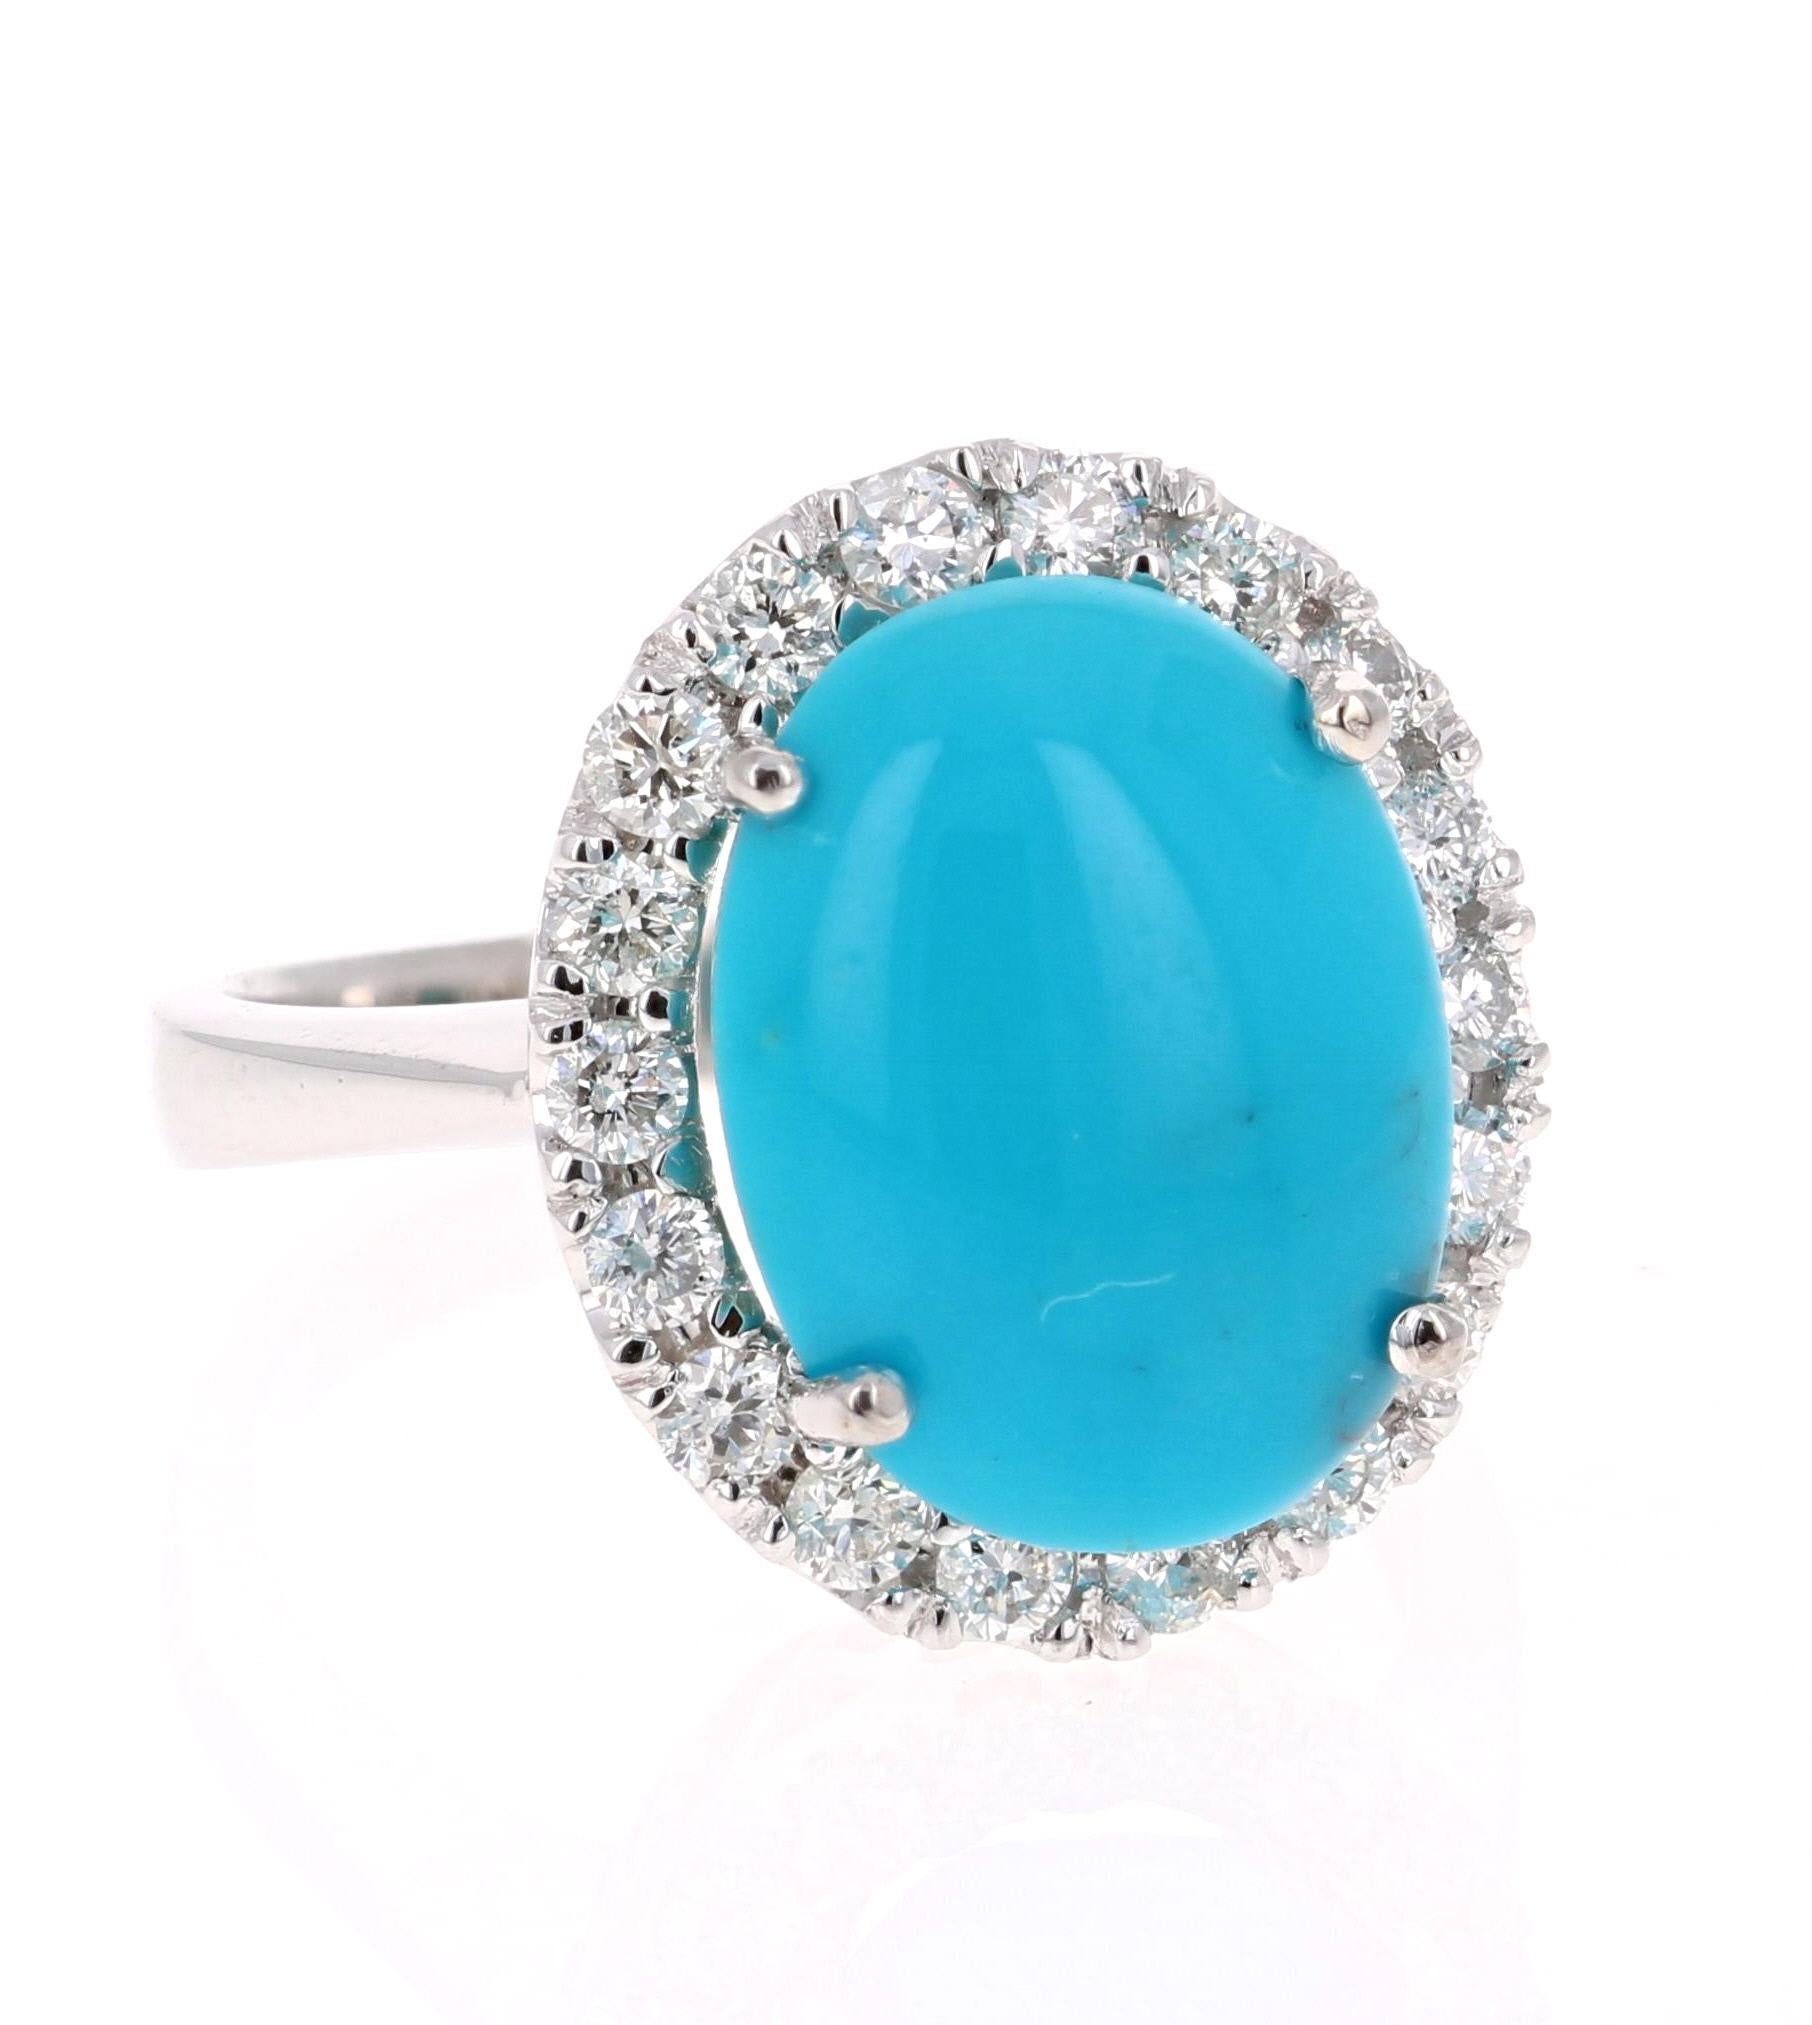 Beautiful Turquoise Diamond Cabochon Cocktail Ring!
The Oval Cut Cabochon Turquoise is 6.63 Carats and has a halo of 18 Round Cut Diamonds weighing 0.65 Carats (Clarity: SI2, Color: F). The total carat weight of the ring is 7.28 Carats. 

It is